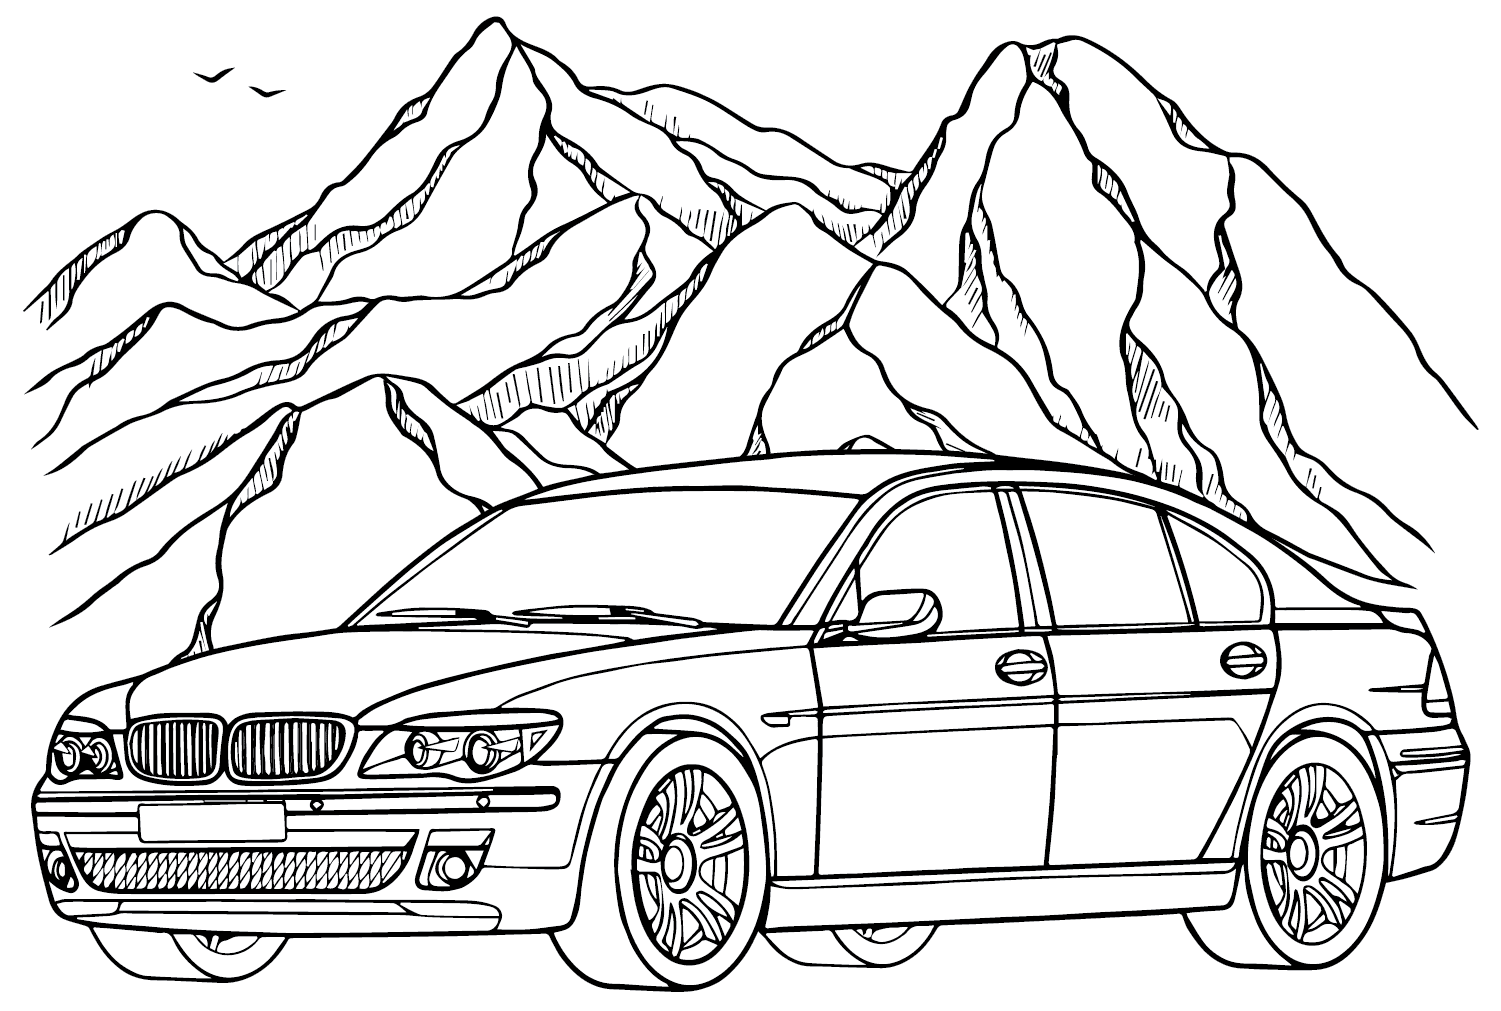 BMW 7 Series Coloring Page from BMW